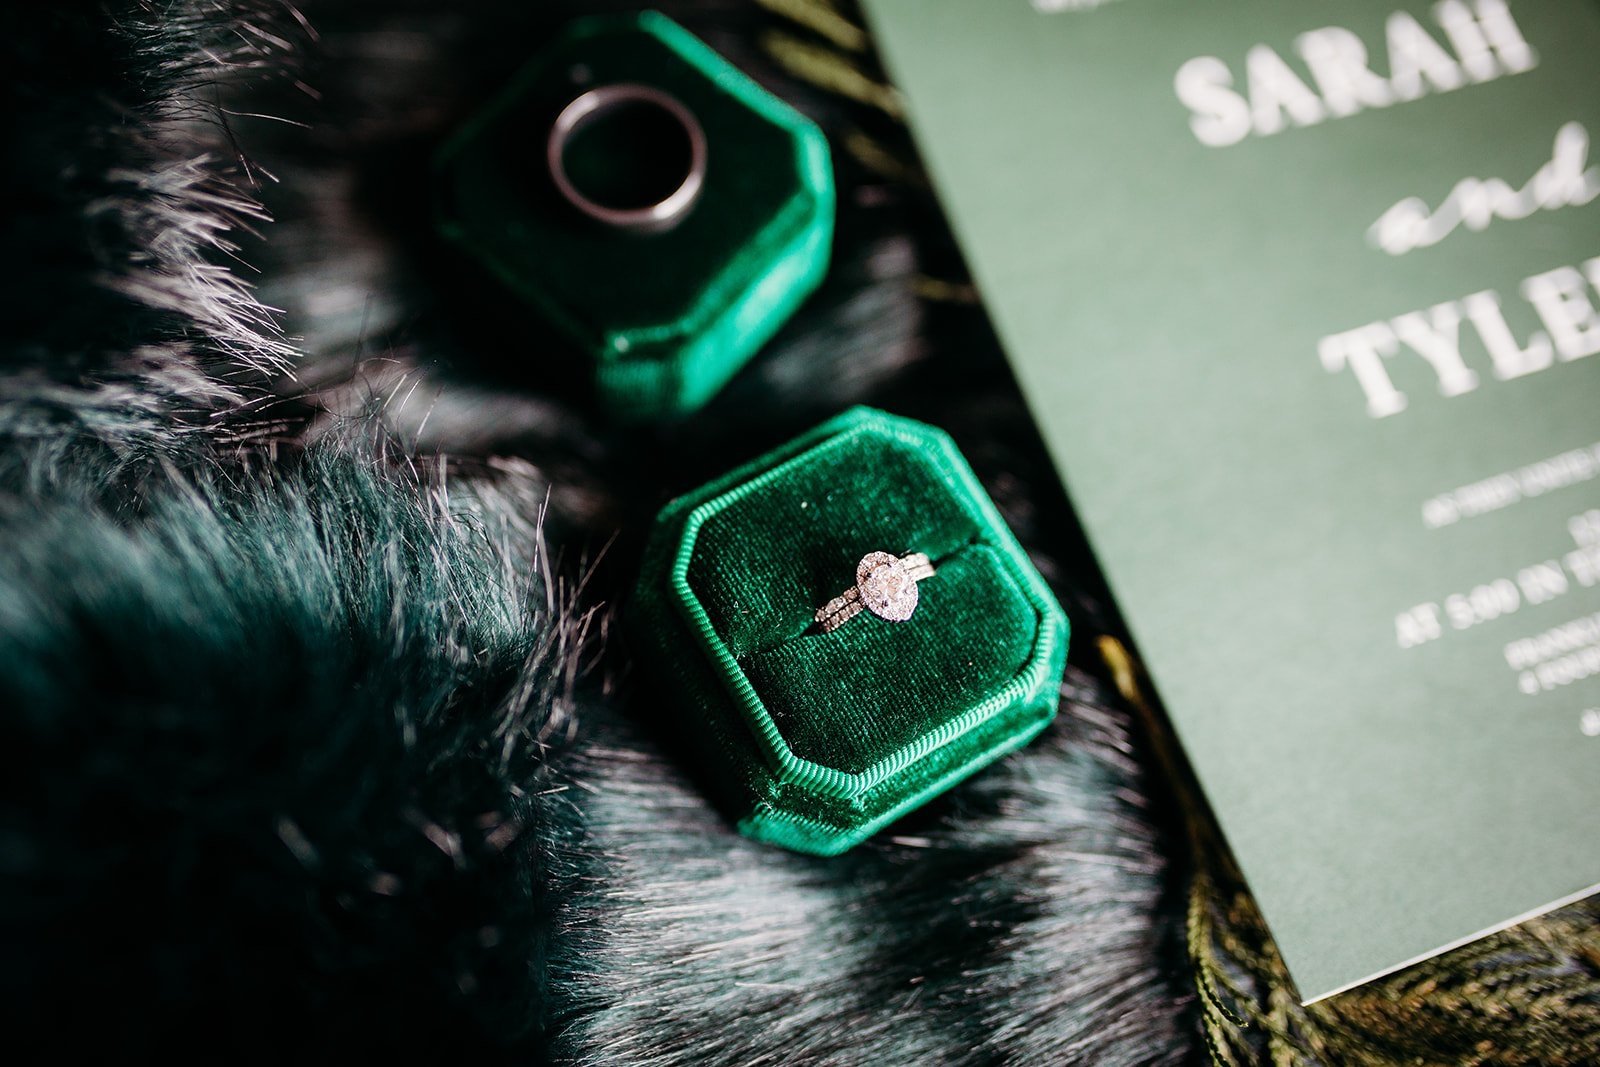 wedding ring rests in emerald green ring box for winter wedding